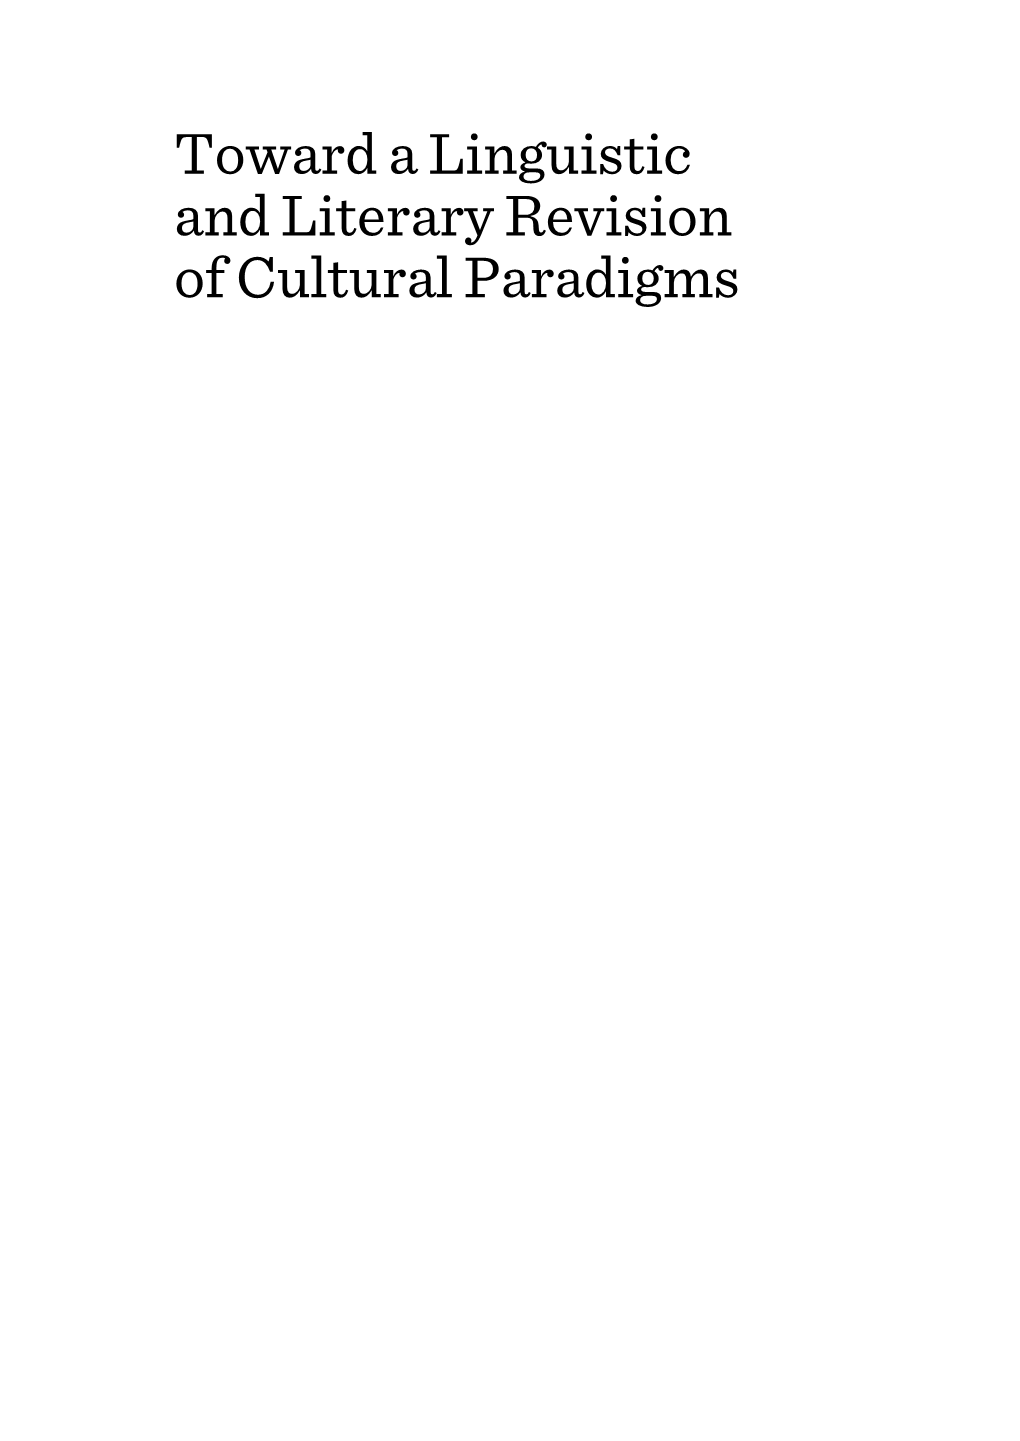 Toward a Linguistic and Literary Revision of Cultural Paradigms